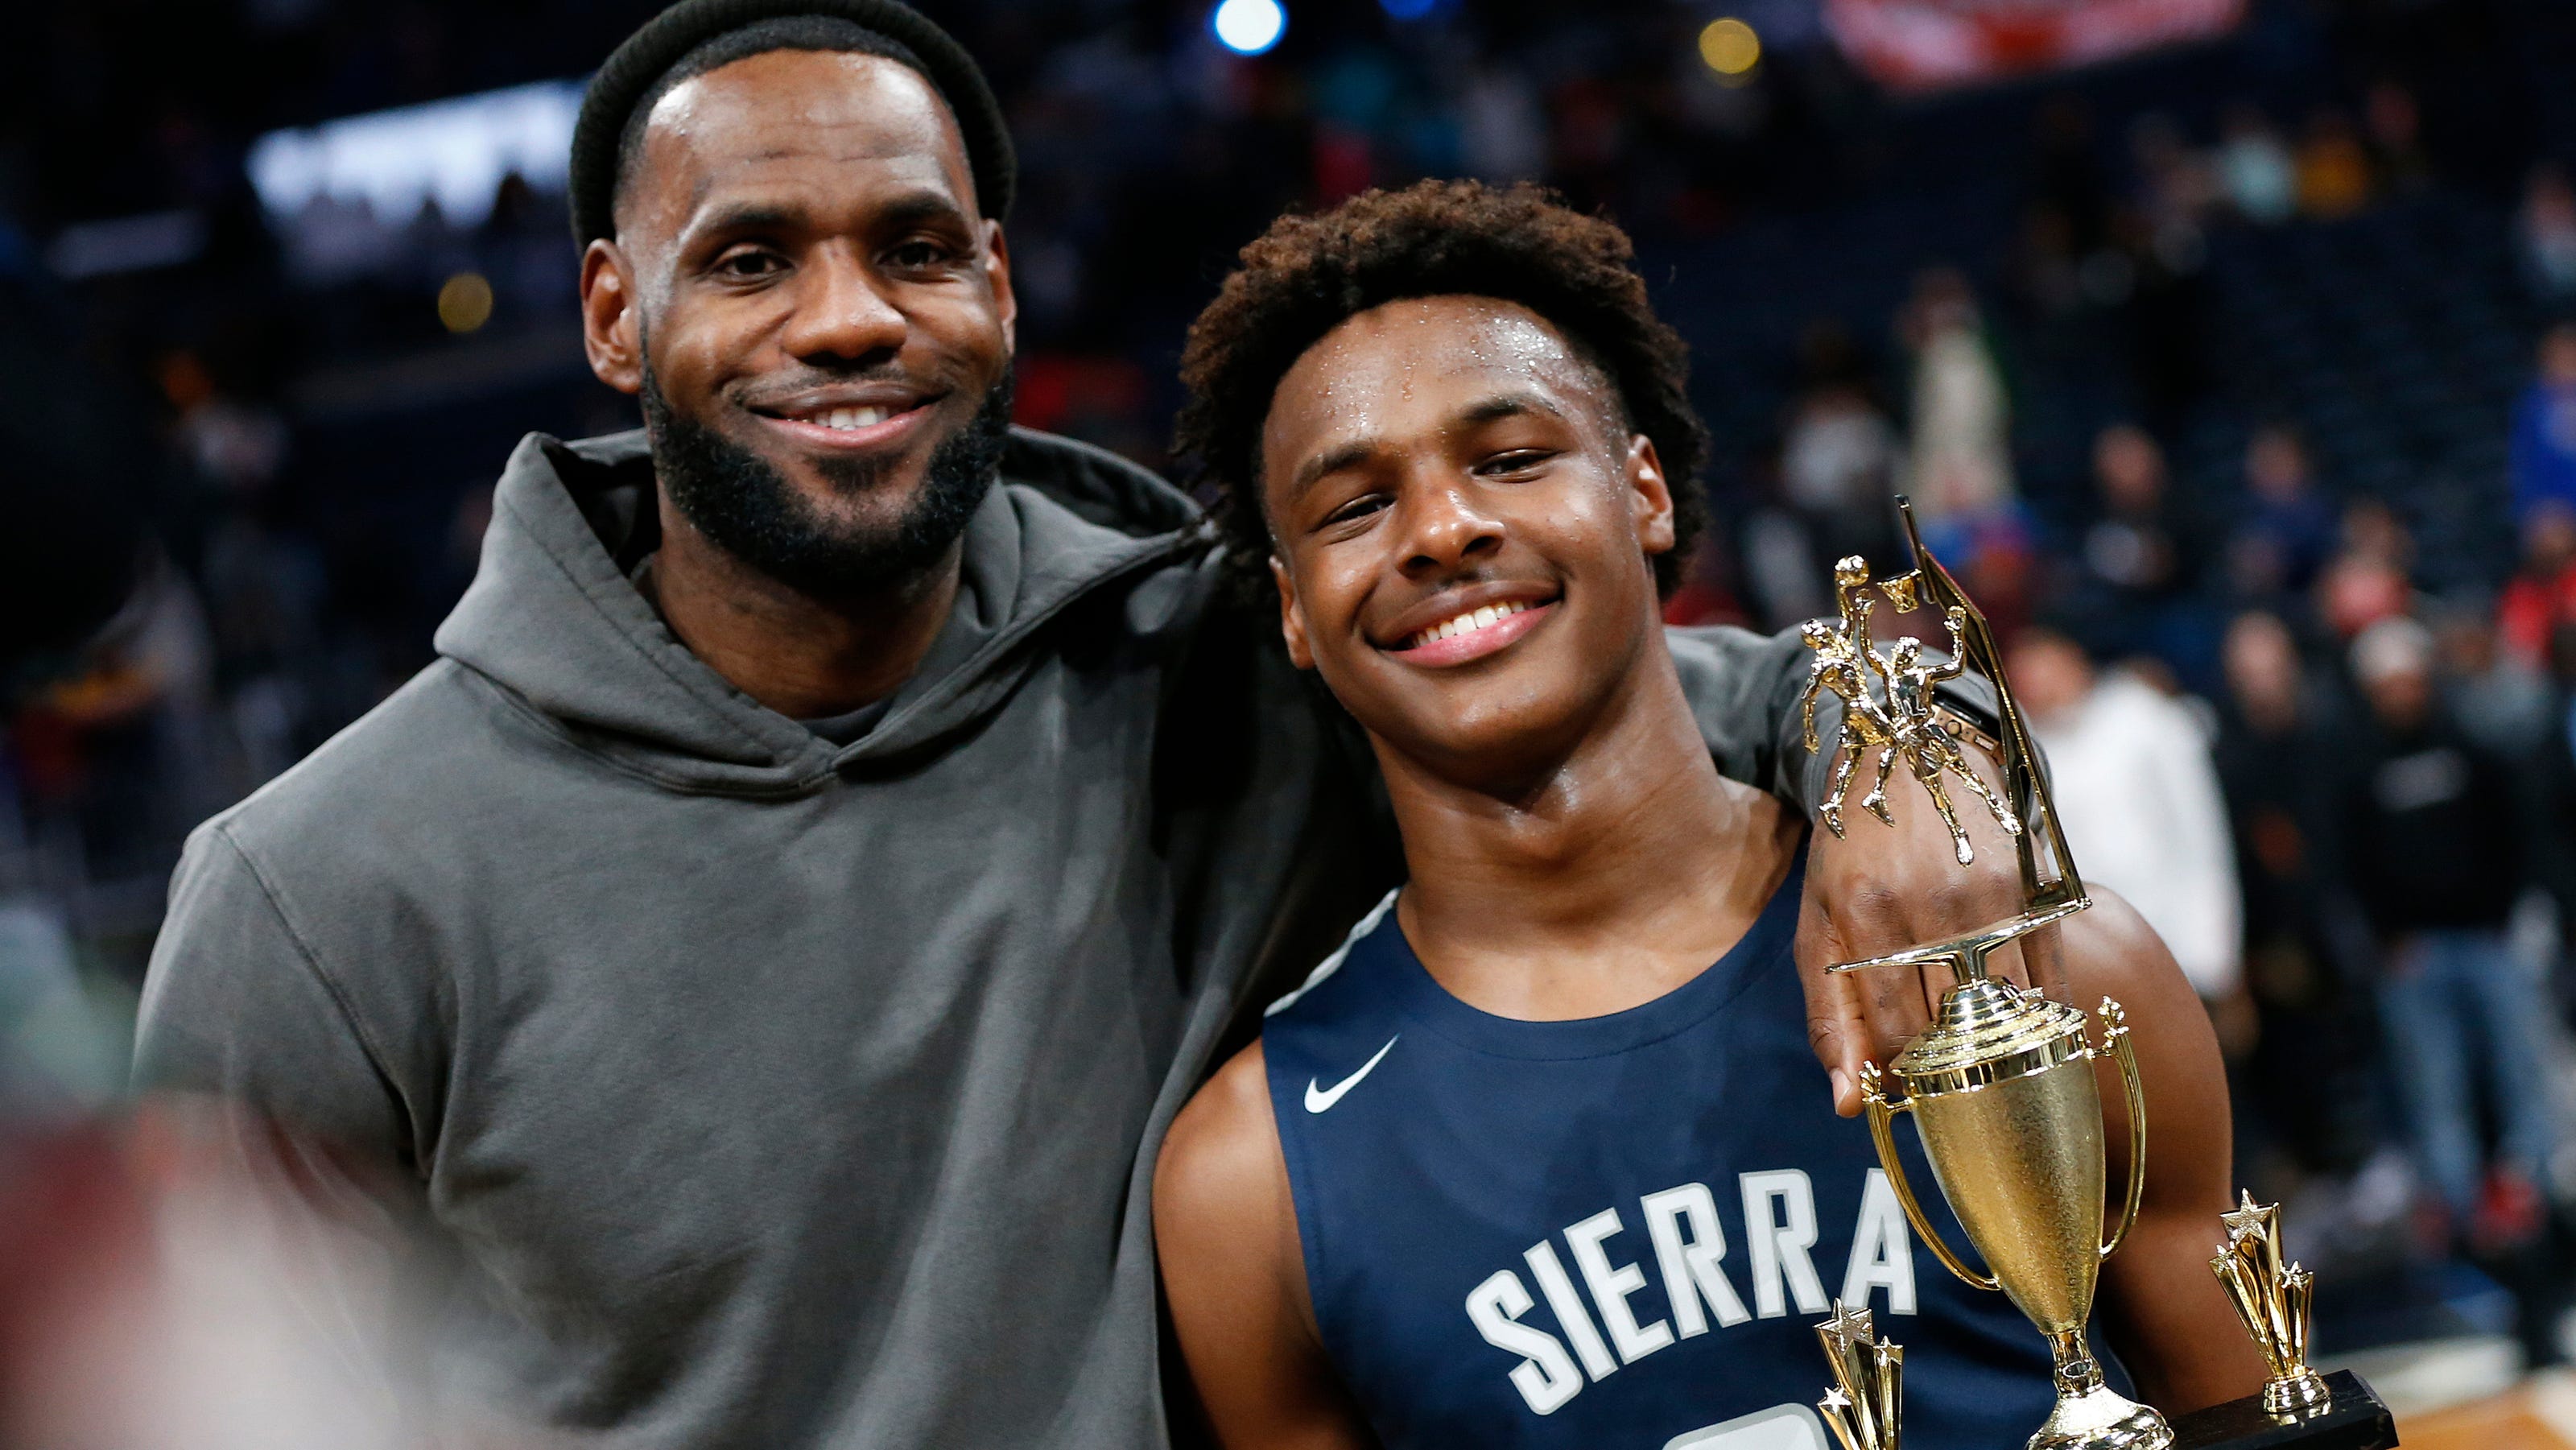 Bronny James Lebron S Son Hits Clutch Shot As Dad Watches Courtside